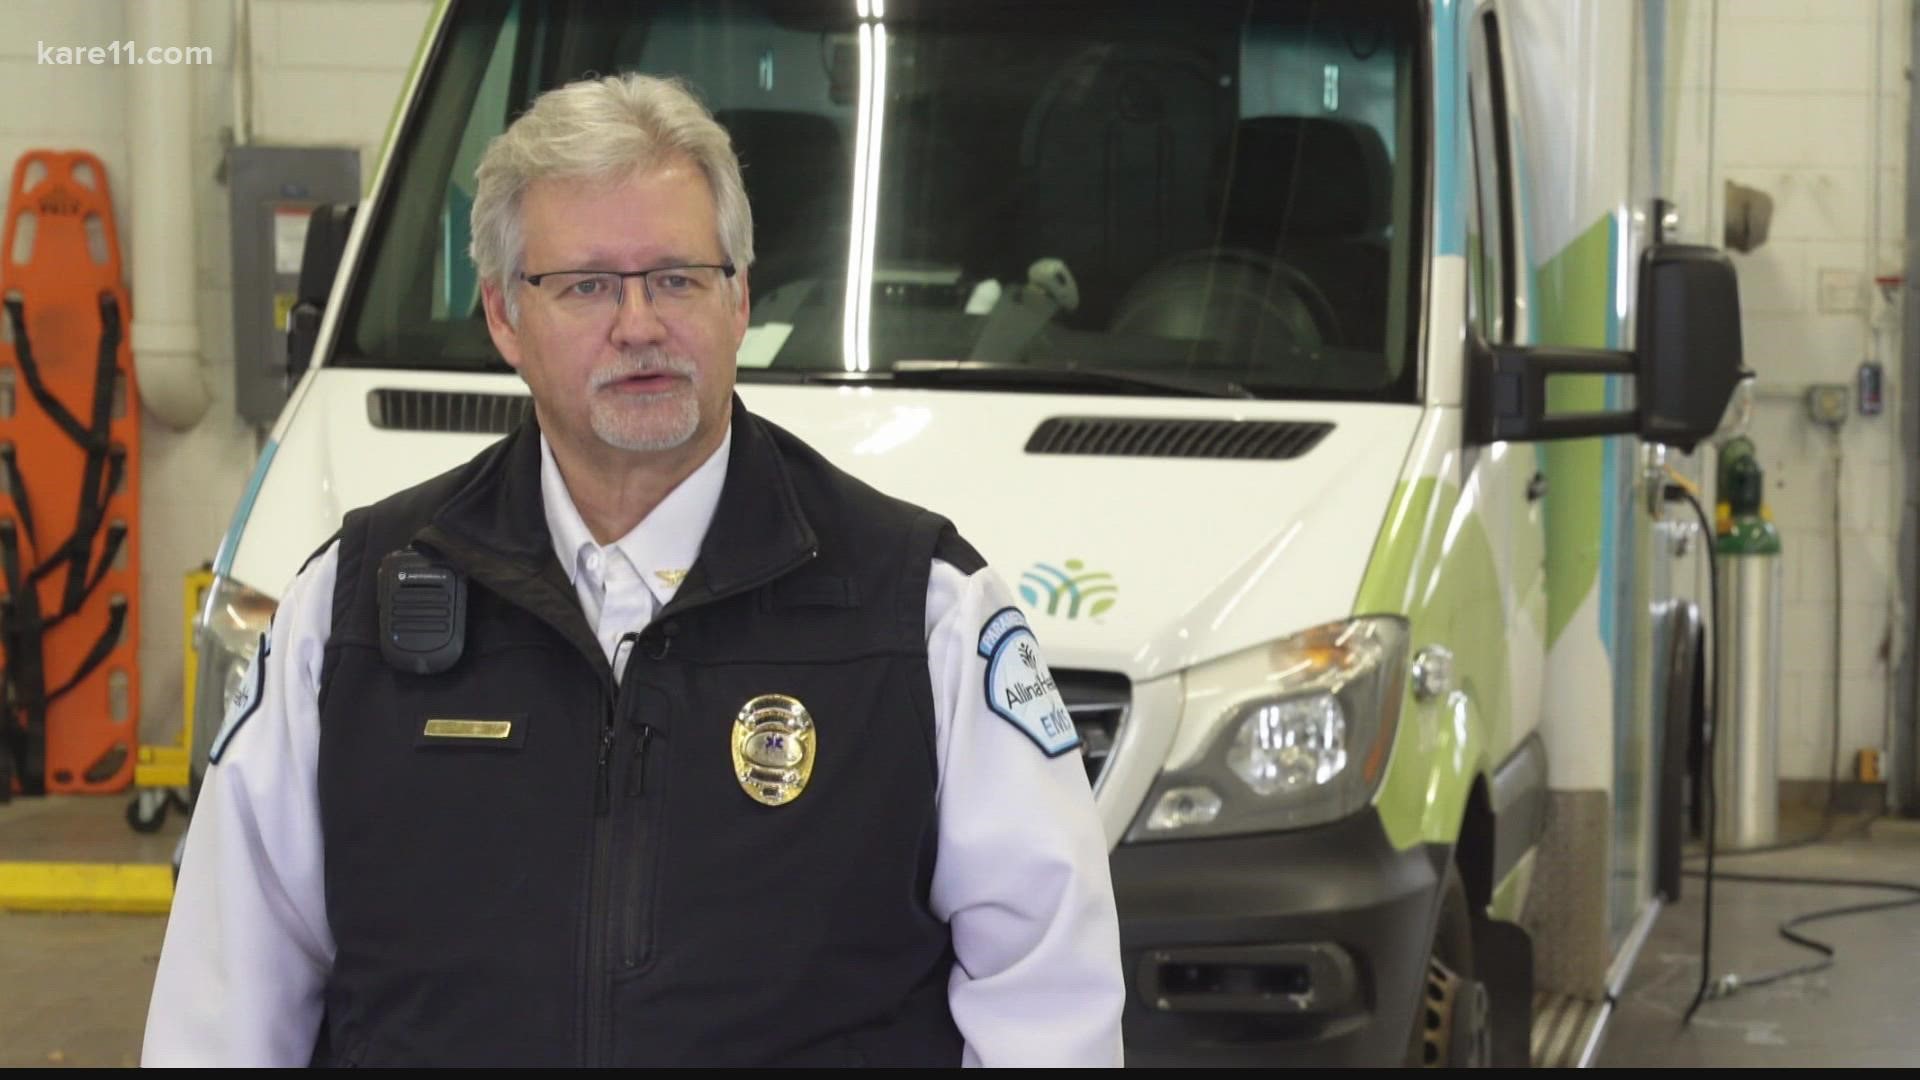 "We're seeing increases in volume anywhere between 20-40% during peak times of the day,” Allina Health EMS Operations Manager Jeff Lanenberg says.